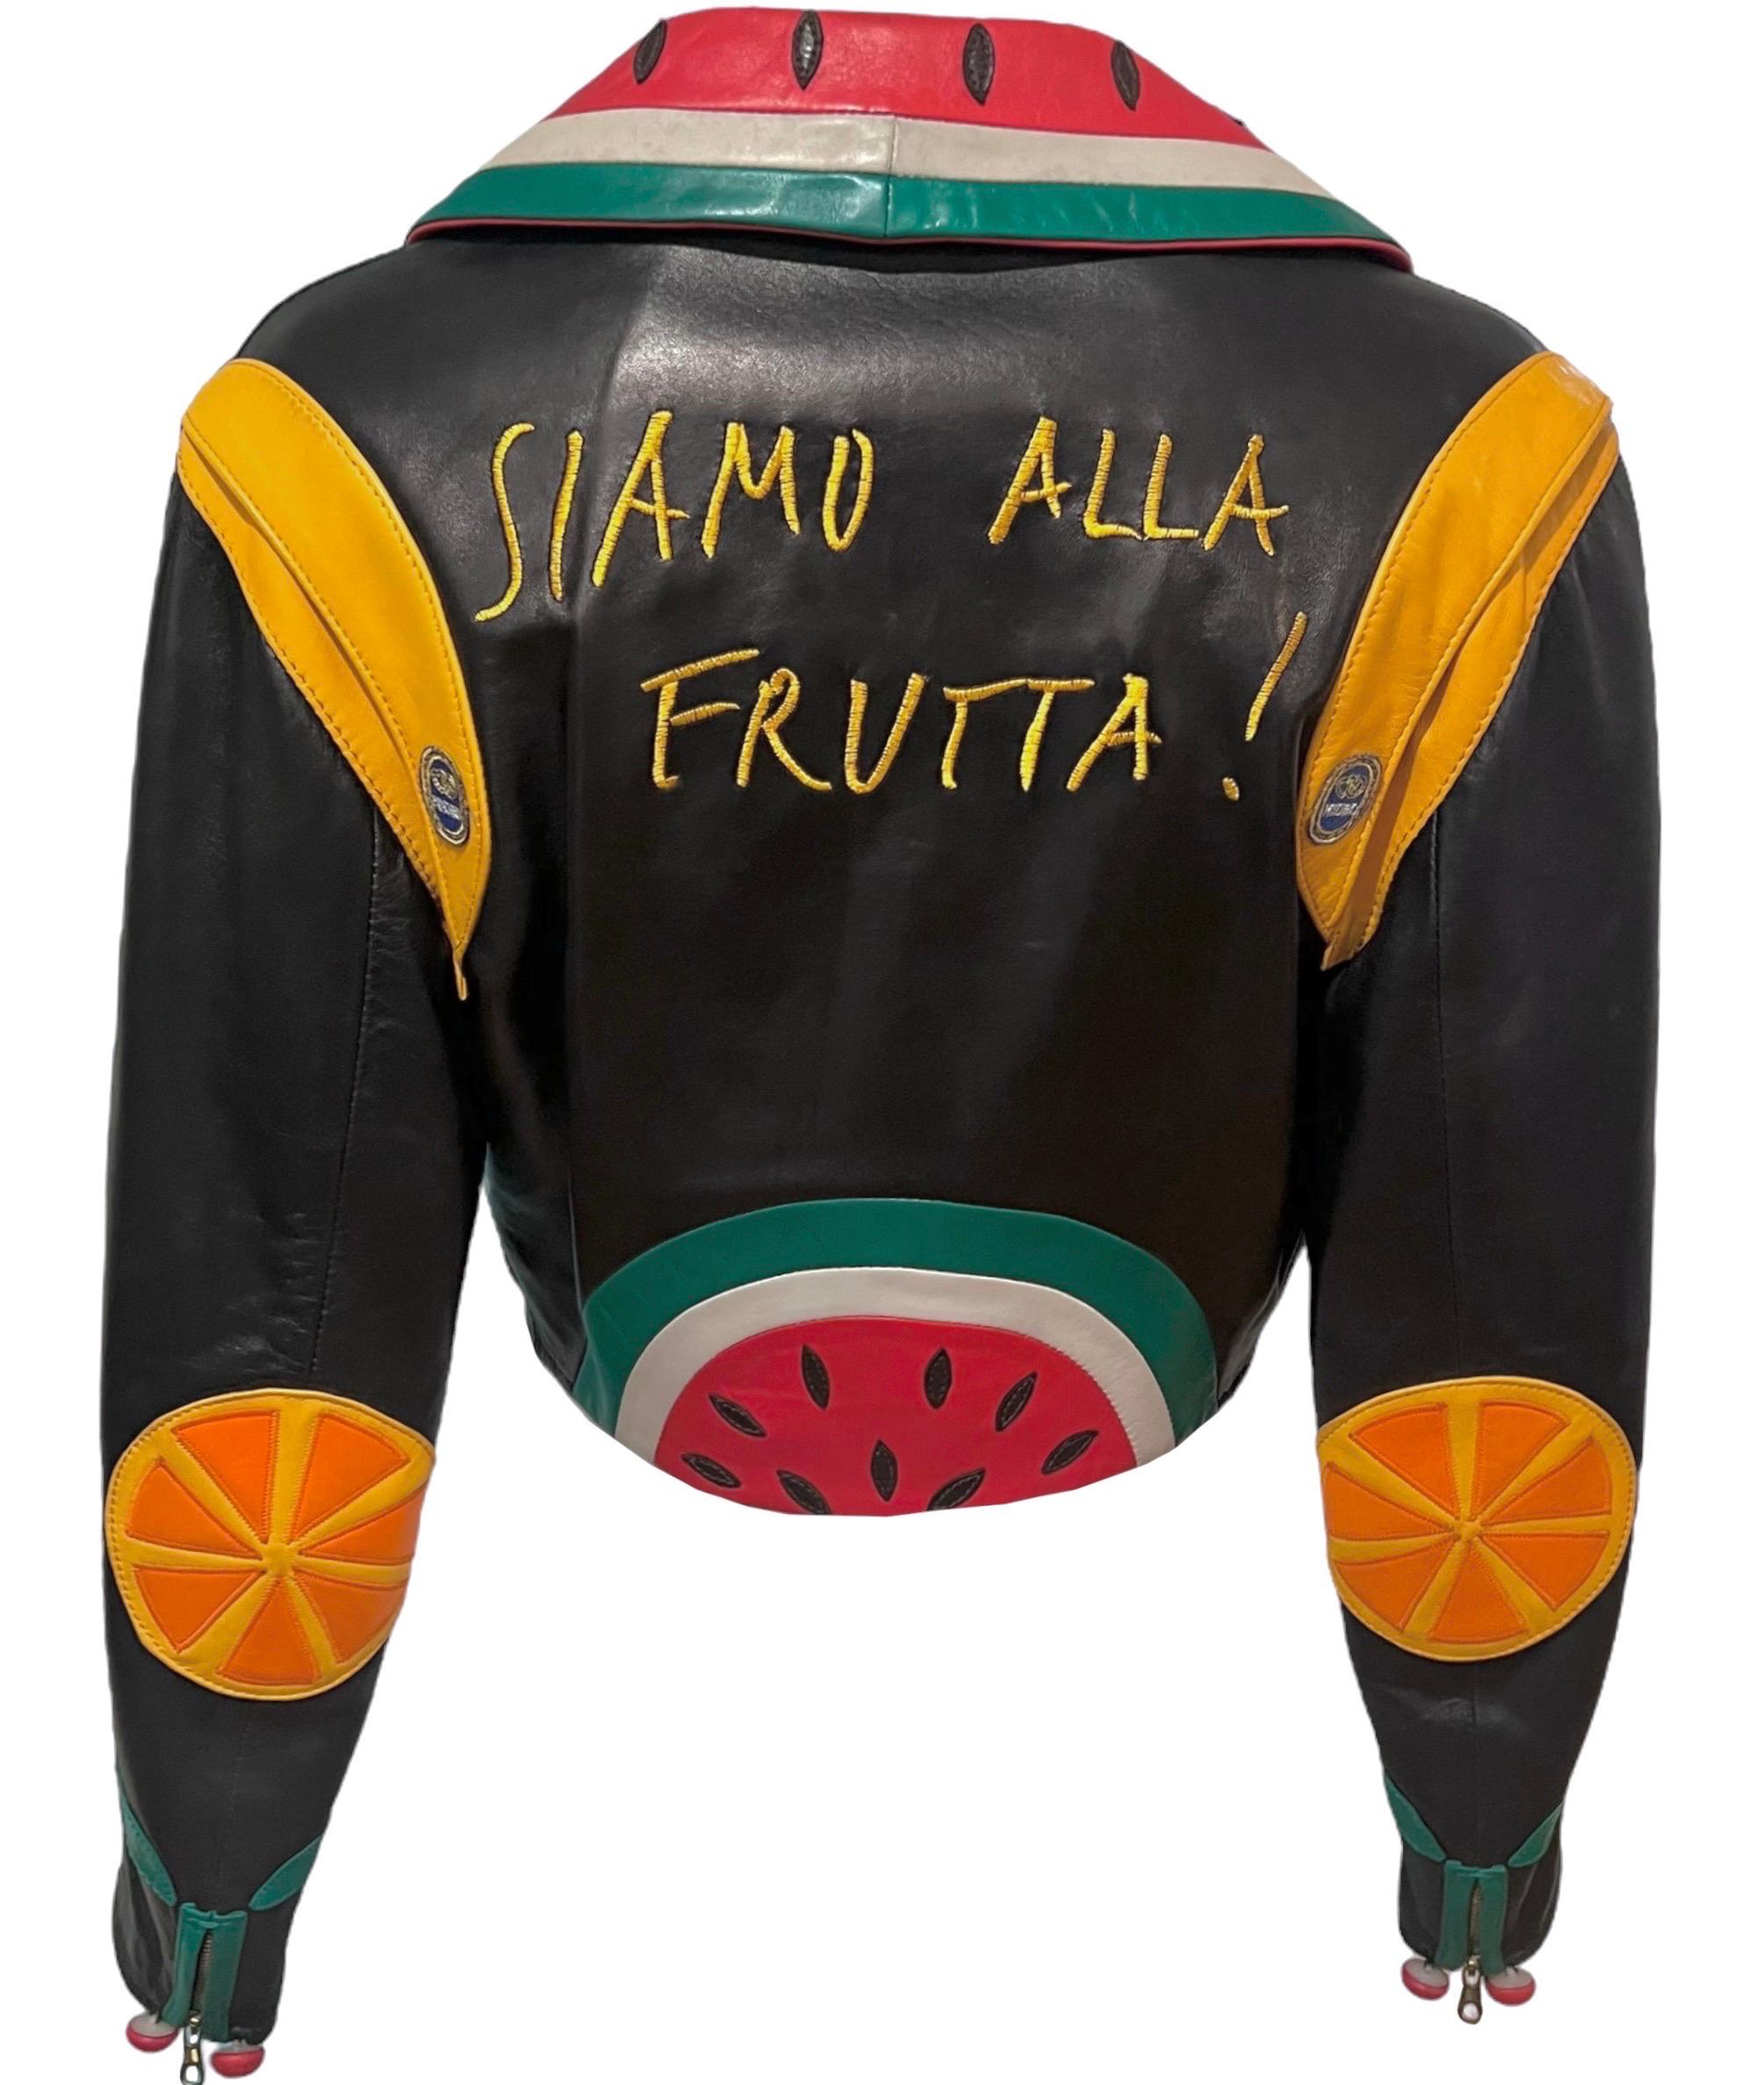 Whimsical rare vintage Moschino black cropped moto leather jacket with colorful fruit appliques. This unique jacket features a watermelon collar, cherry zip pockets, oranges, cherry cuffs, and bananas.
Embroidered with 